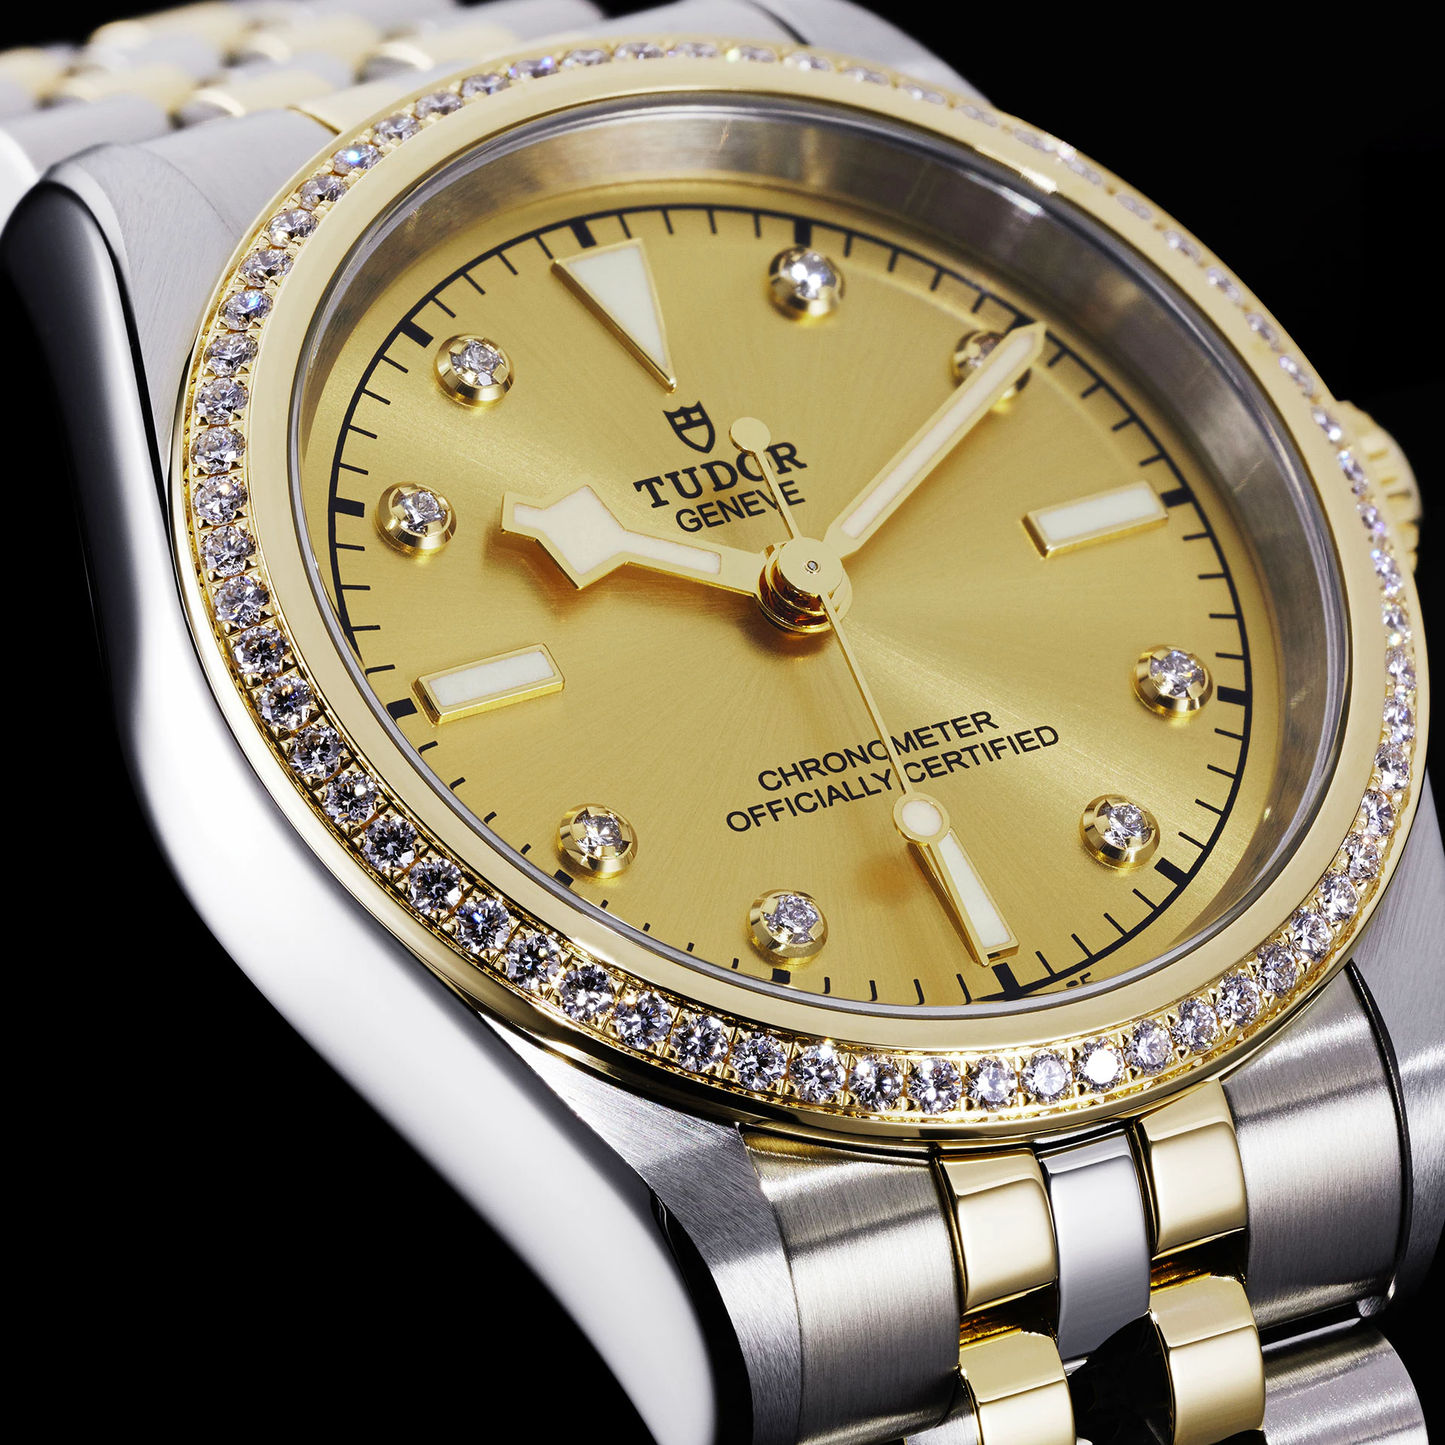 Tudor Black Bay 36 S&G, 316L Stainless Steel, 18k Yellow Gold and Diamonds, Ref# M79653-0007, Dial